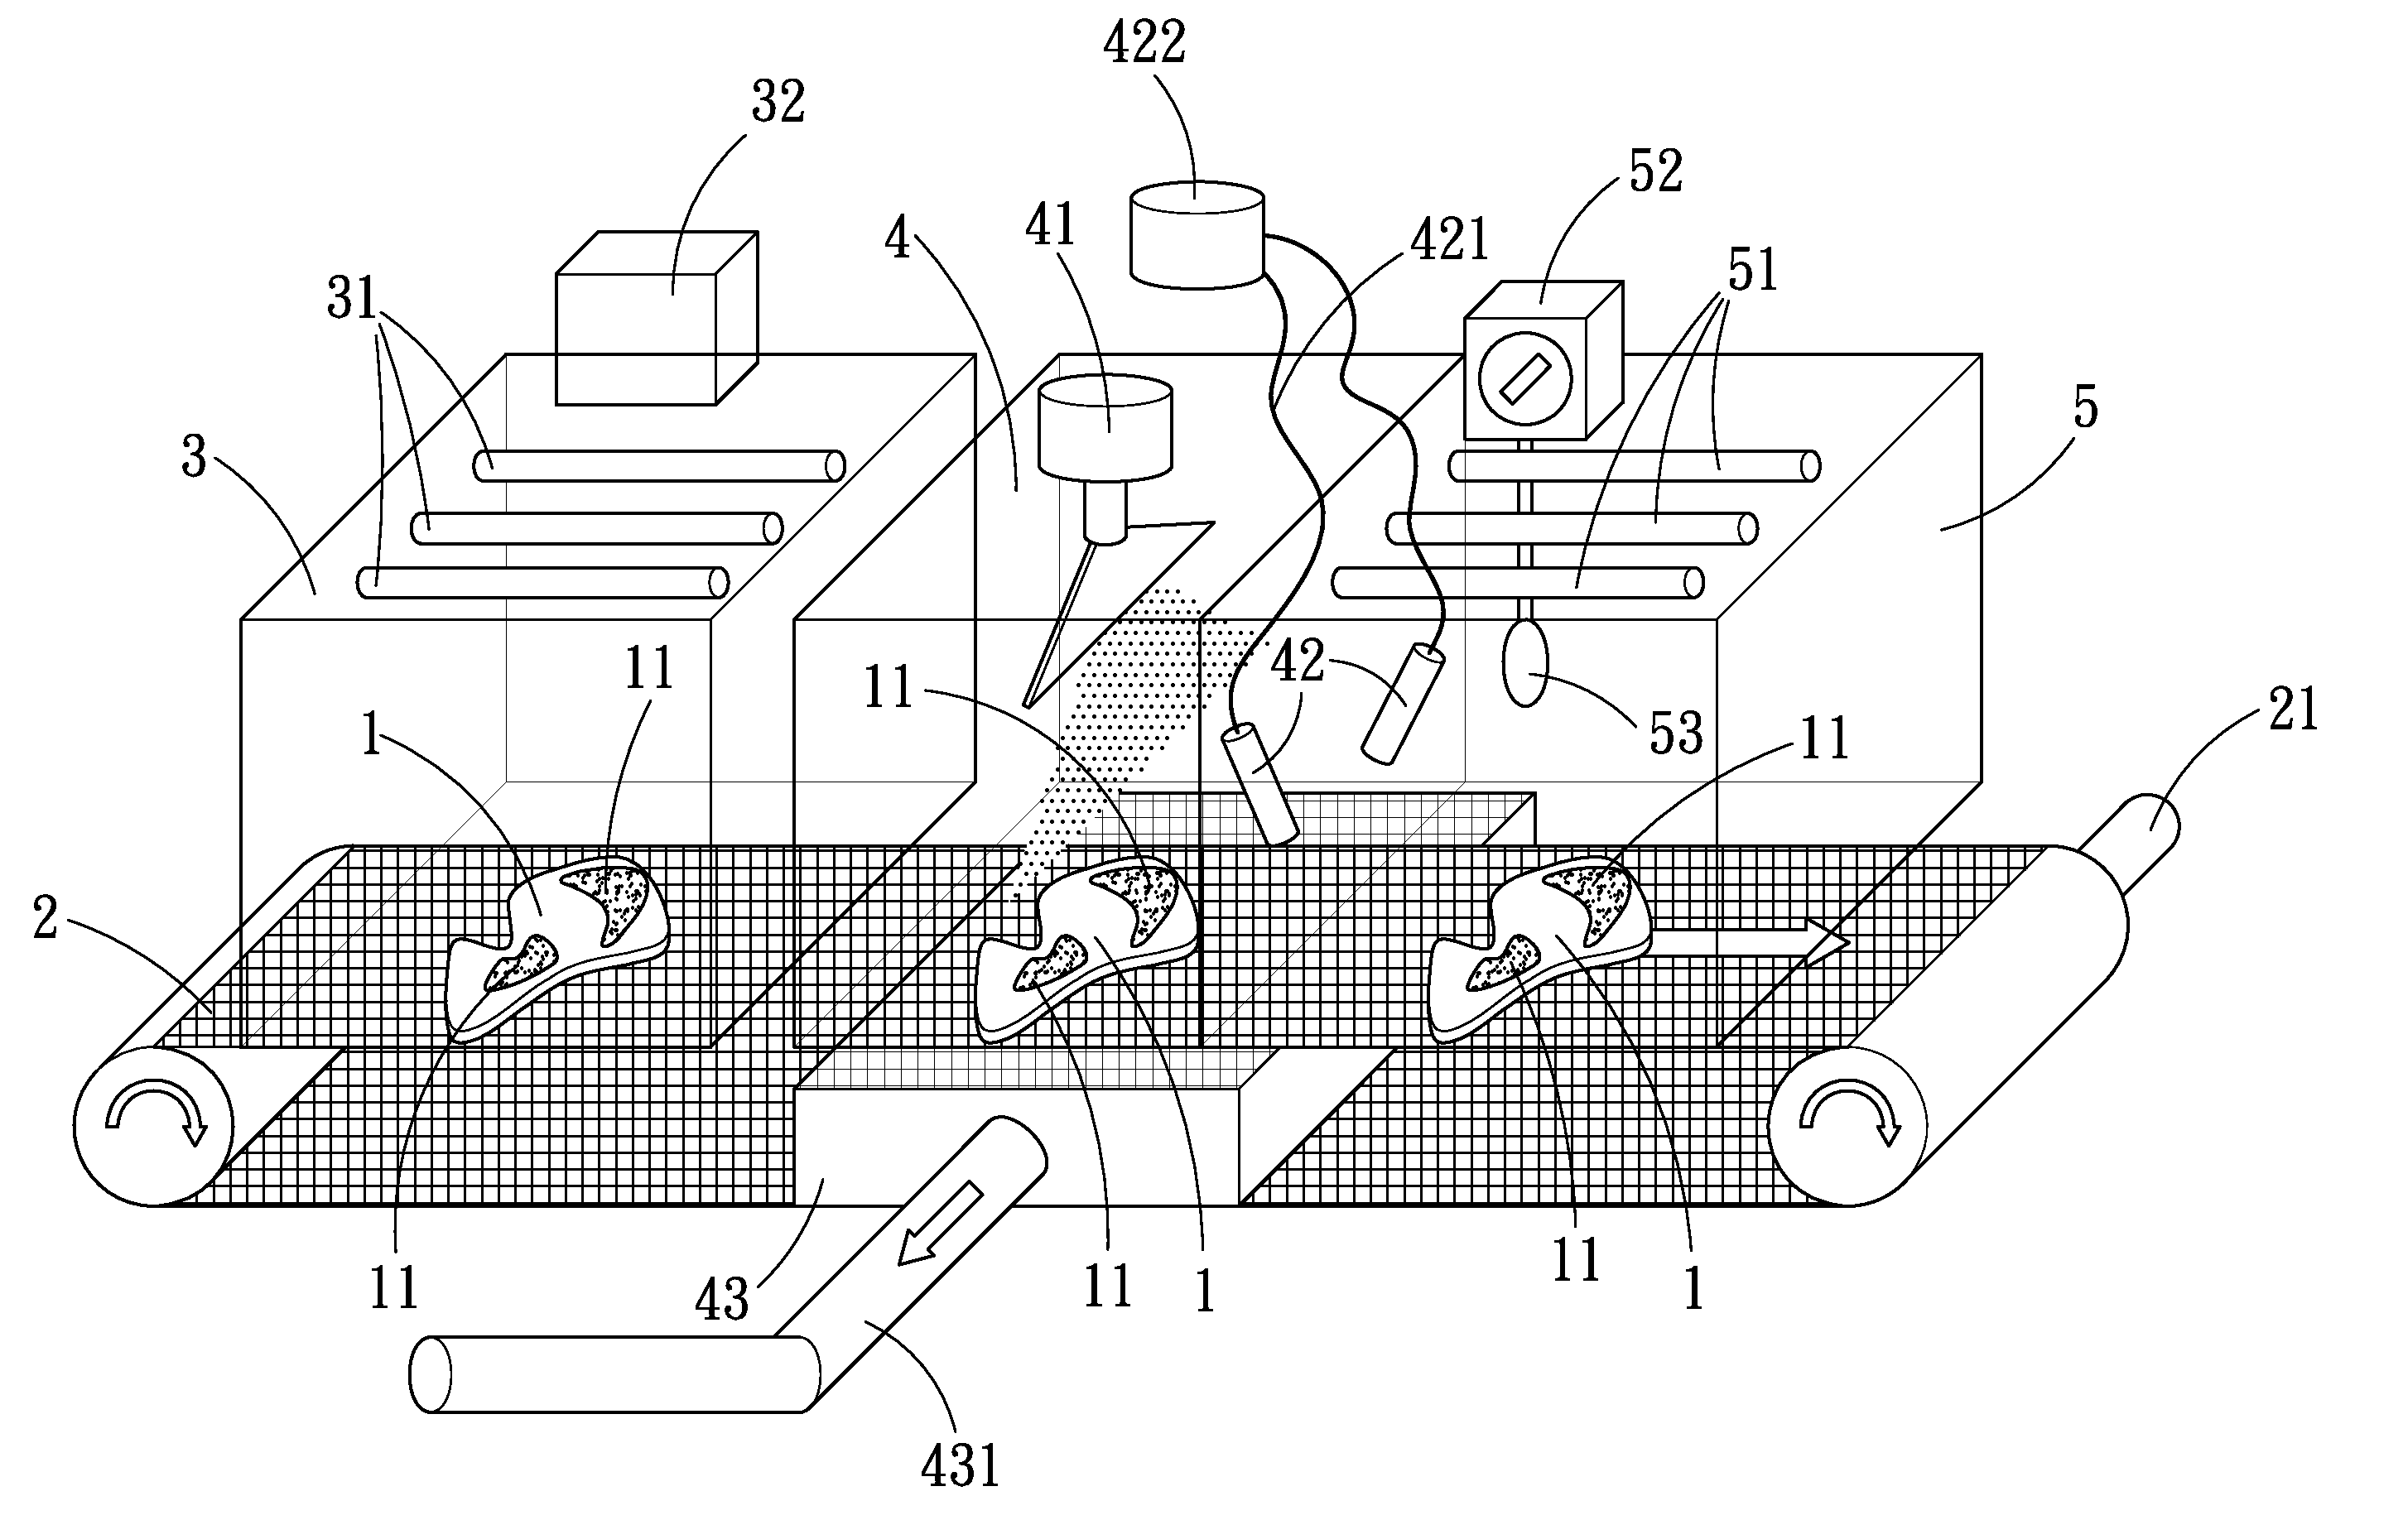 Method and System for Applying Hot Melt Adhesive Powder onto a Non-Metallic Object Surface